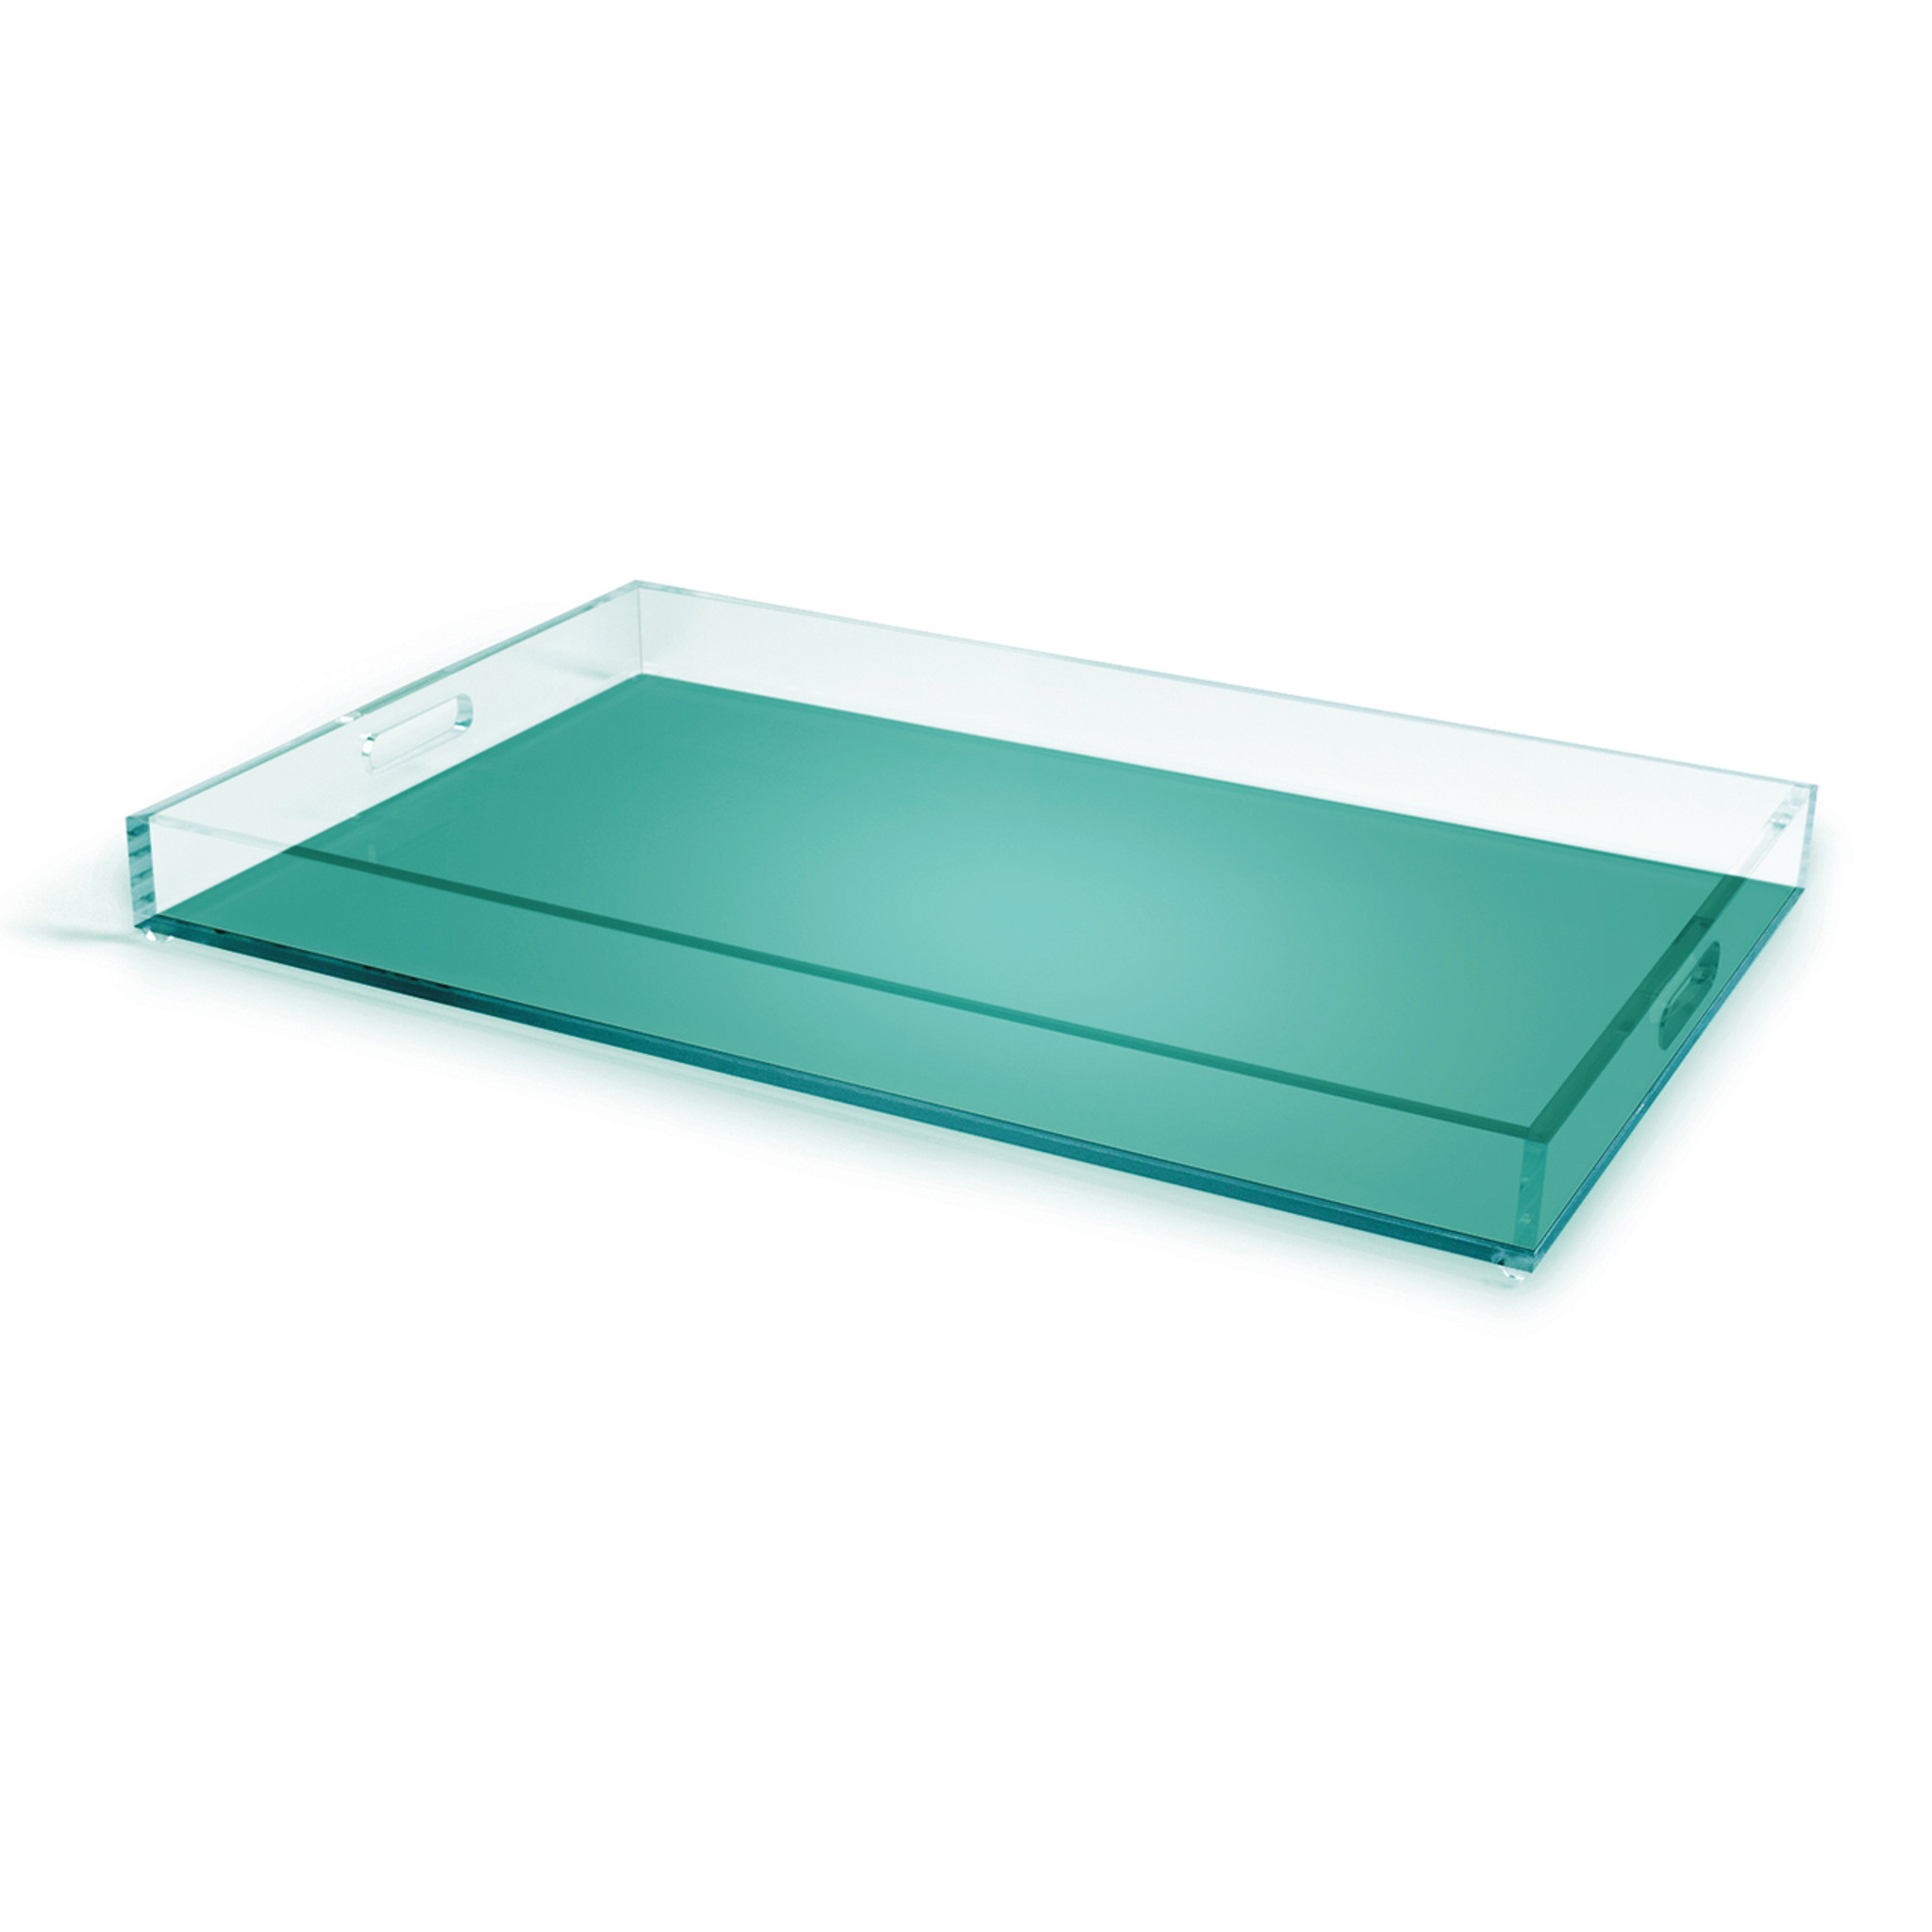 neon color acrylic serving decorative lucite tray handles modern clear teal WWS_T2120_AT_00002